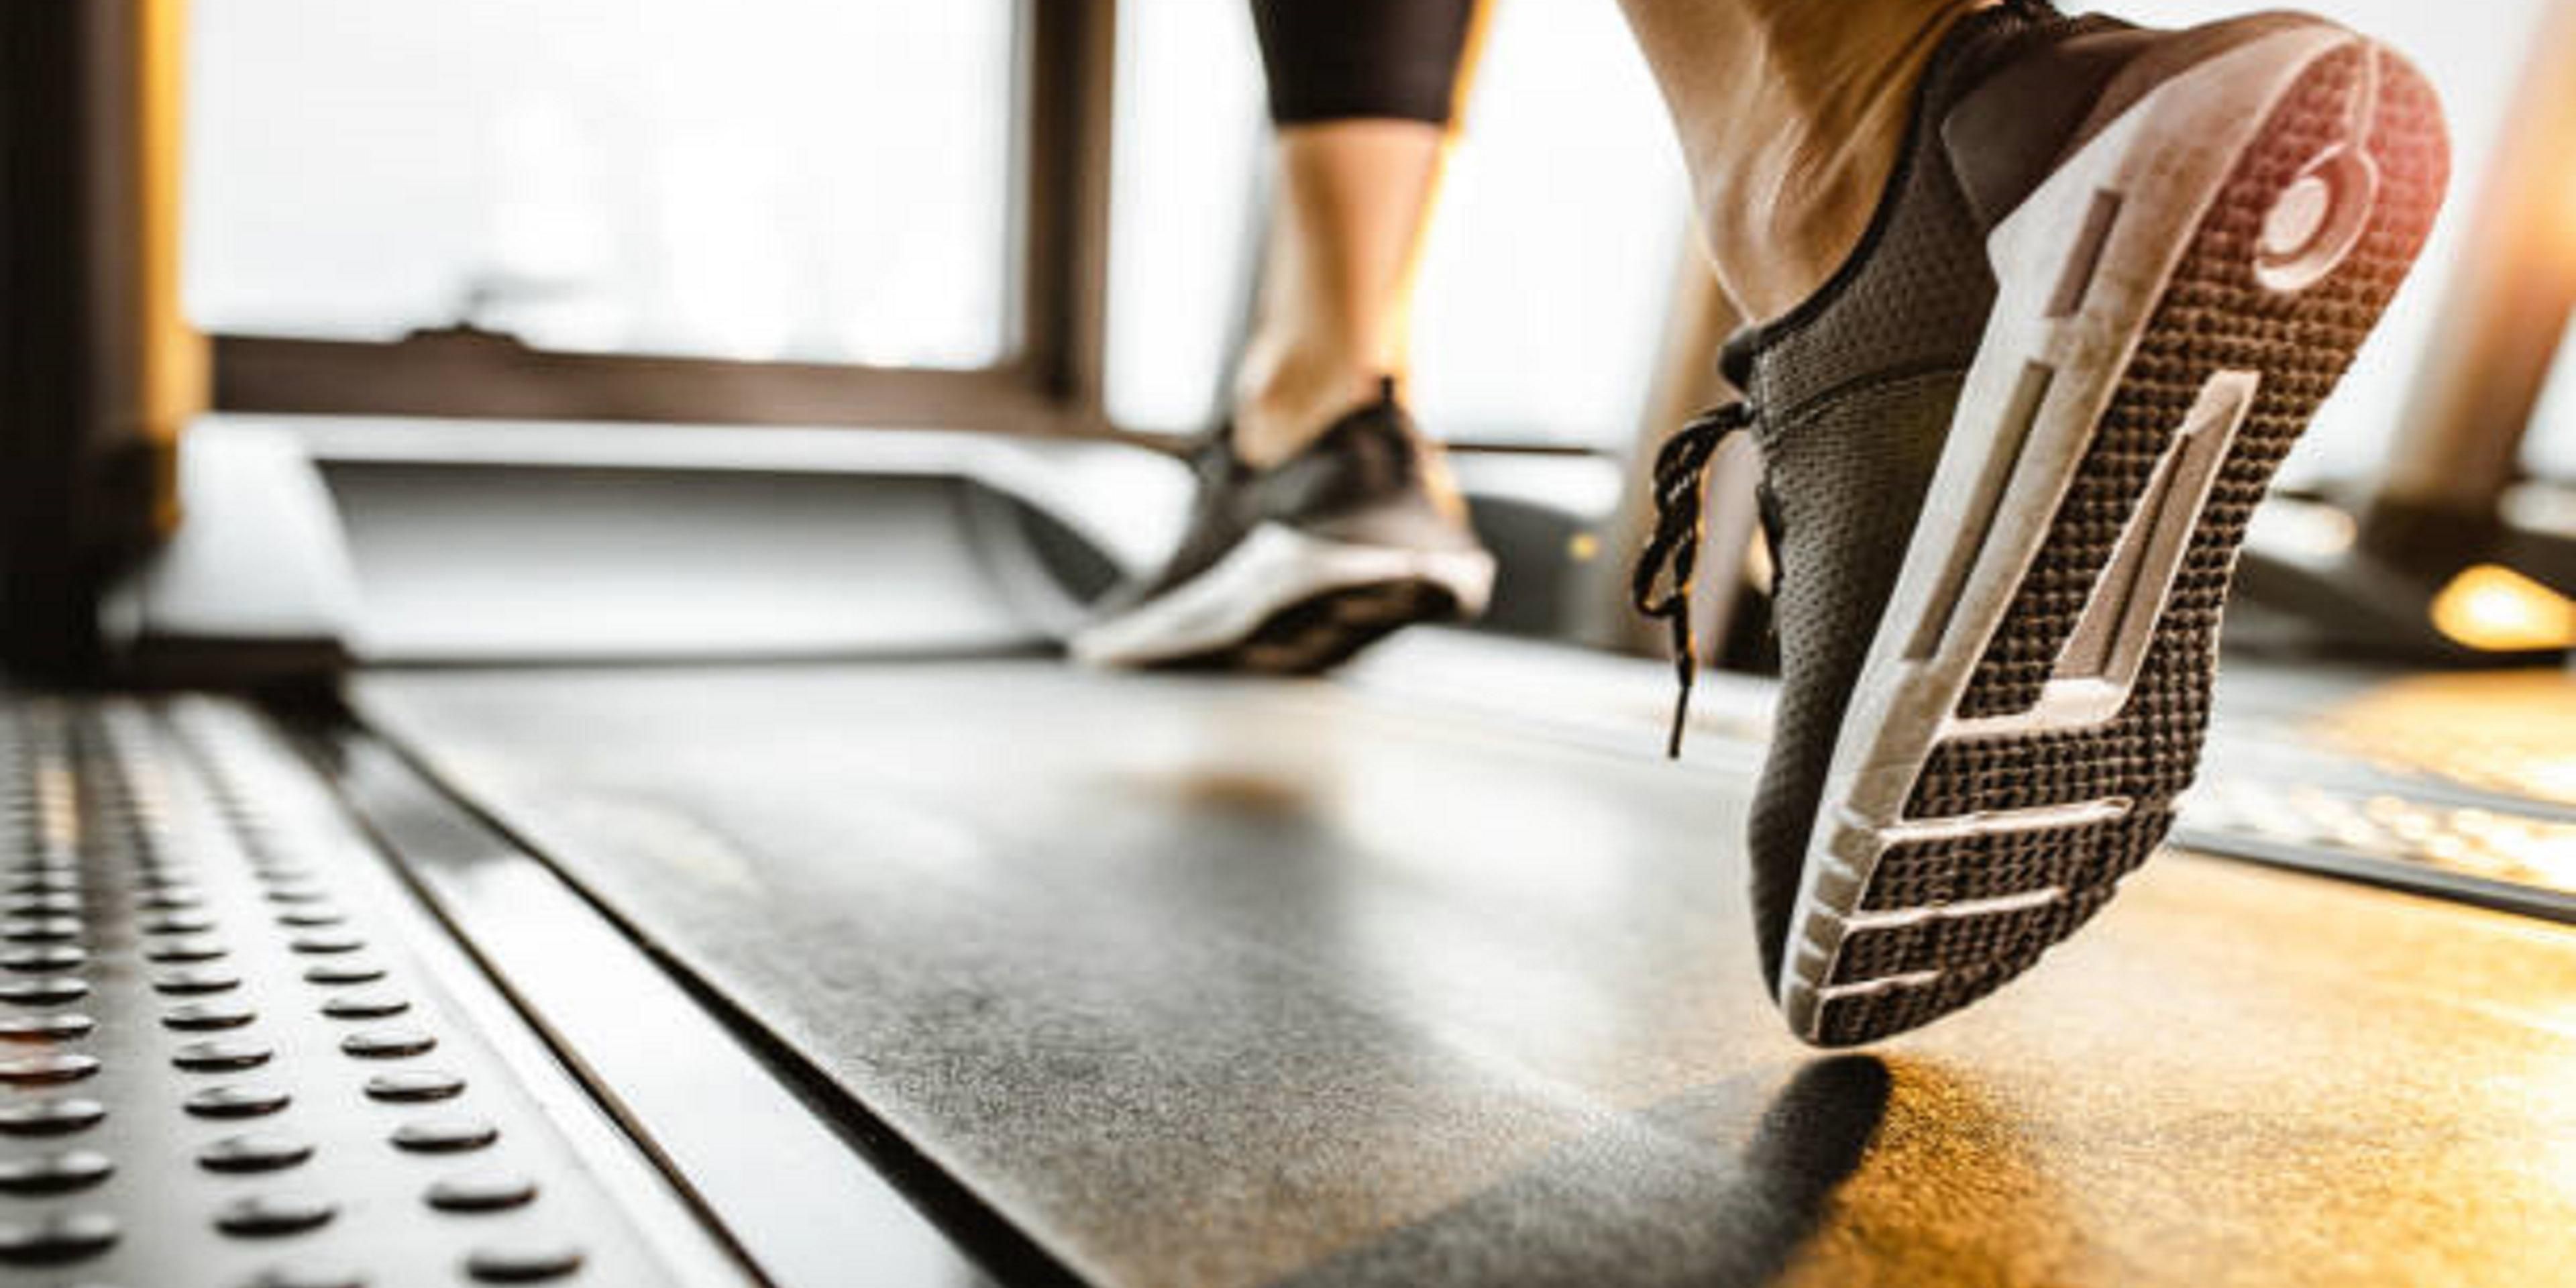 Get your sweat on in our complimentary, fully equipped Fitness Center with two treadmills, an elliptical, stair stepper machine, free weights, and stationary bike. 